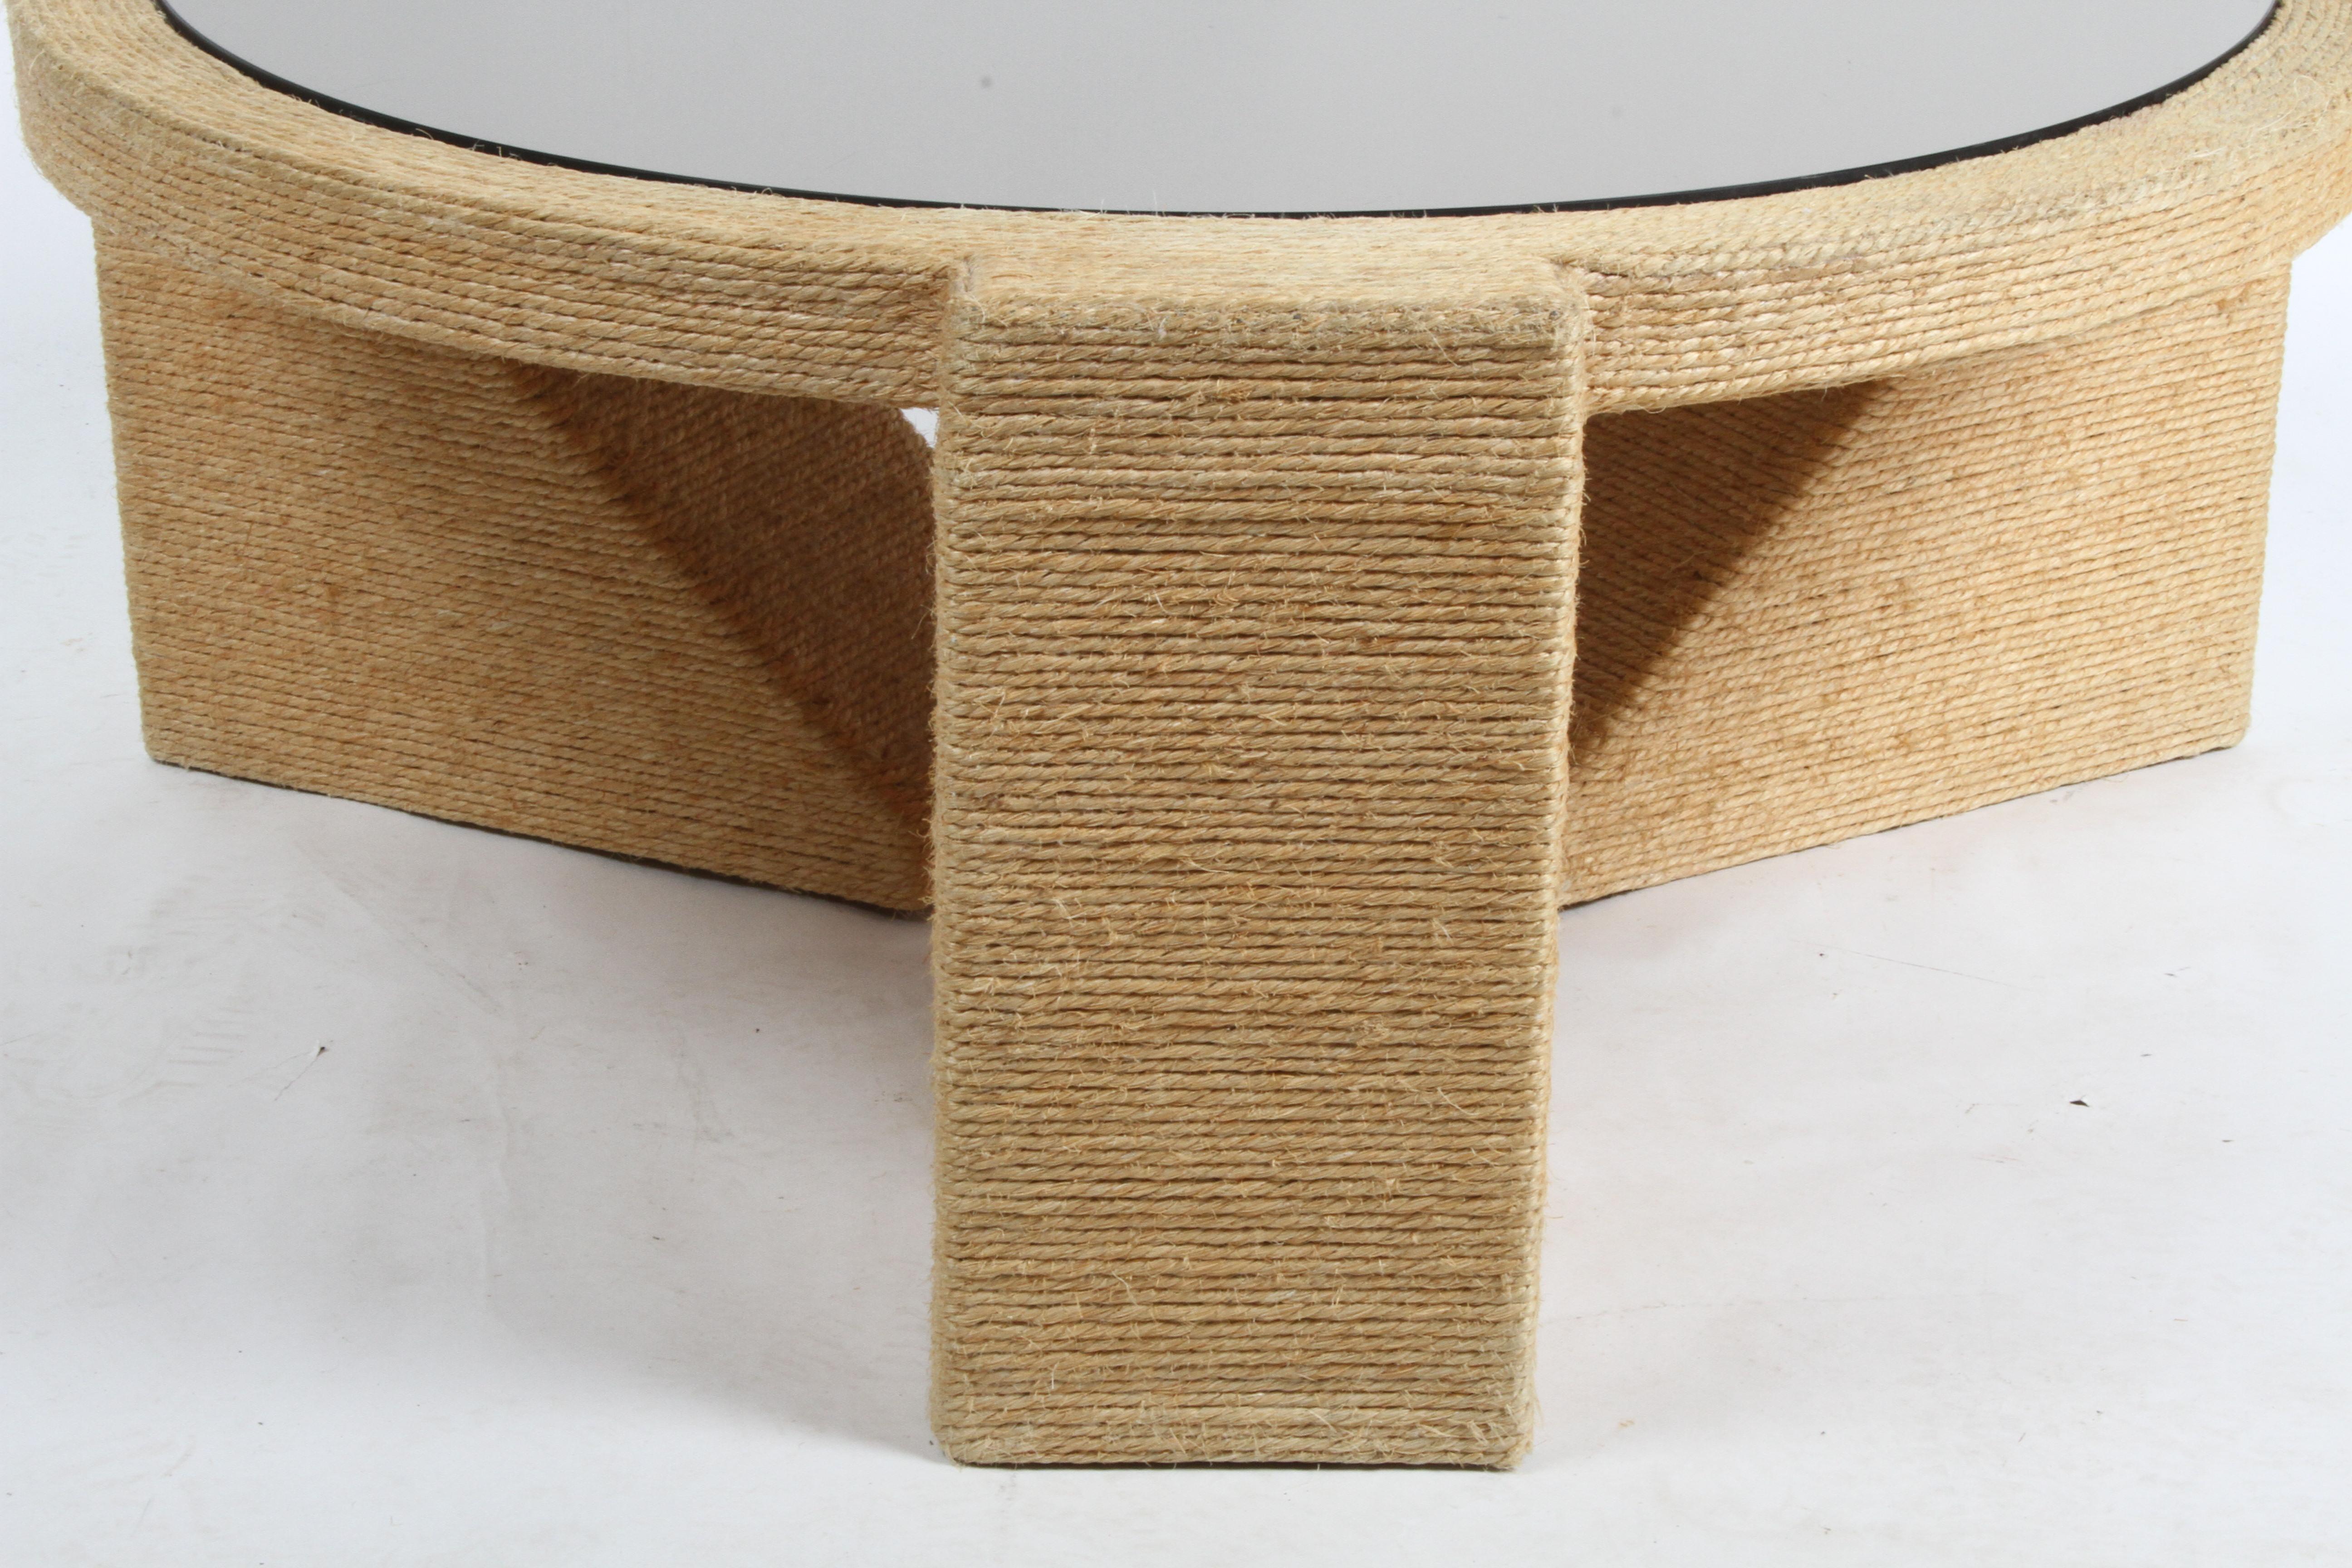 Sculptural 1970s Jute Rope Wrapped Round Coffee Table with Bronze Mirror Top For Sale 1